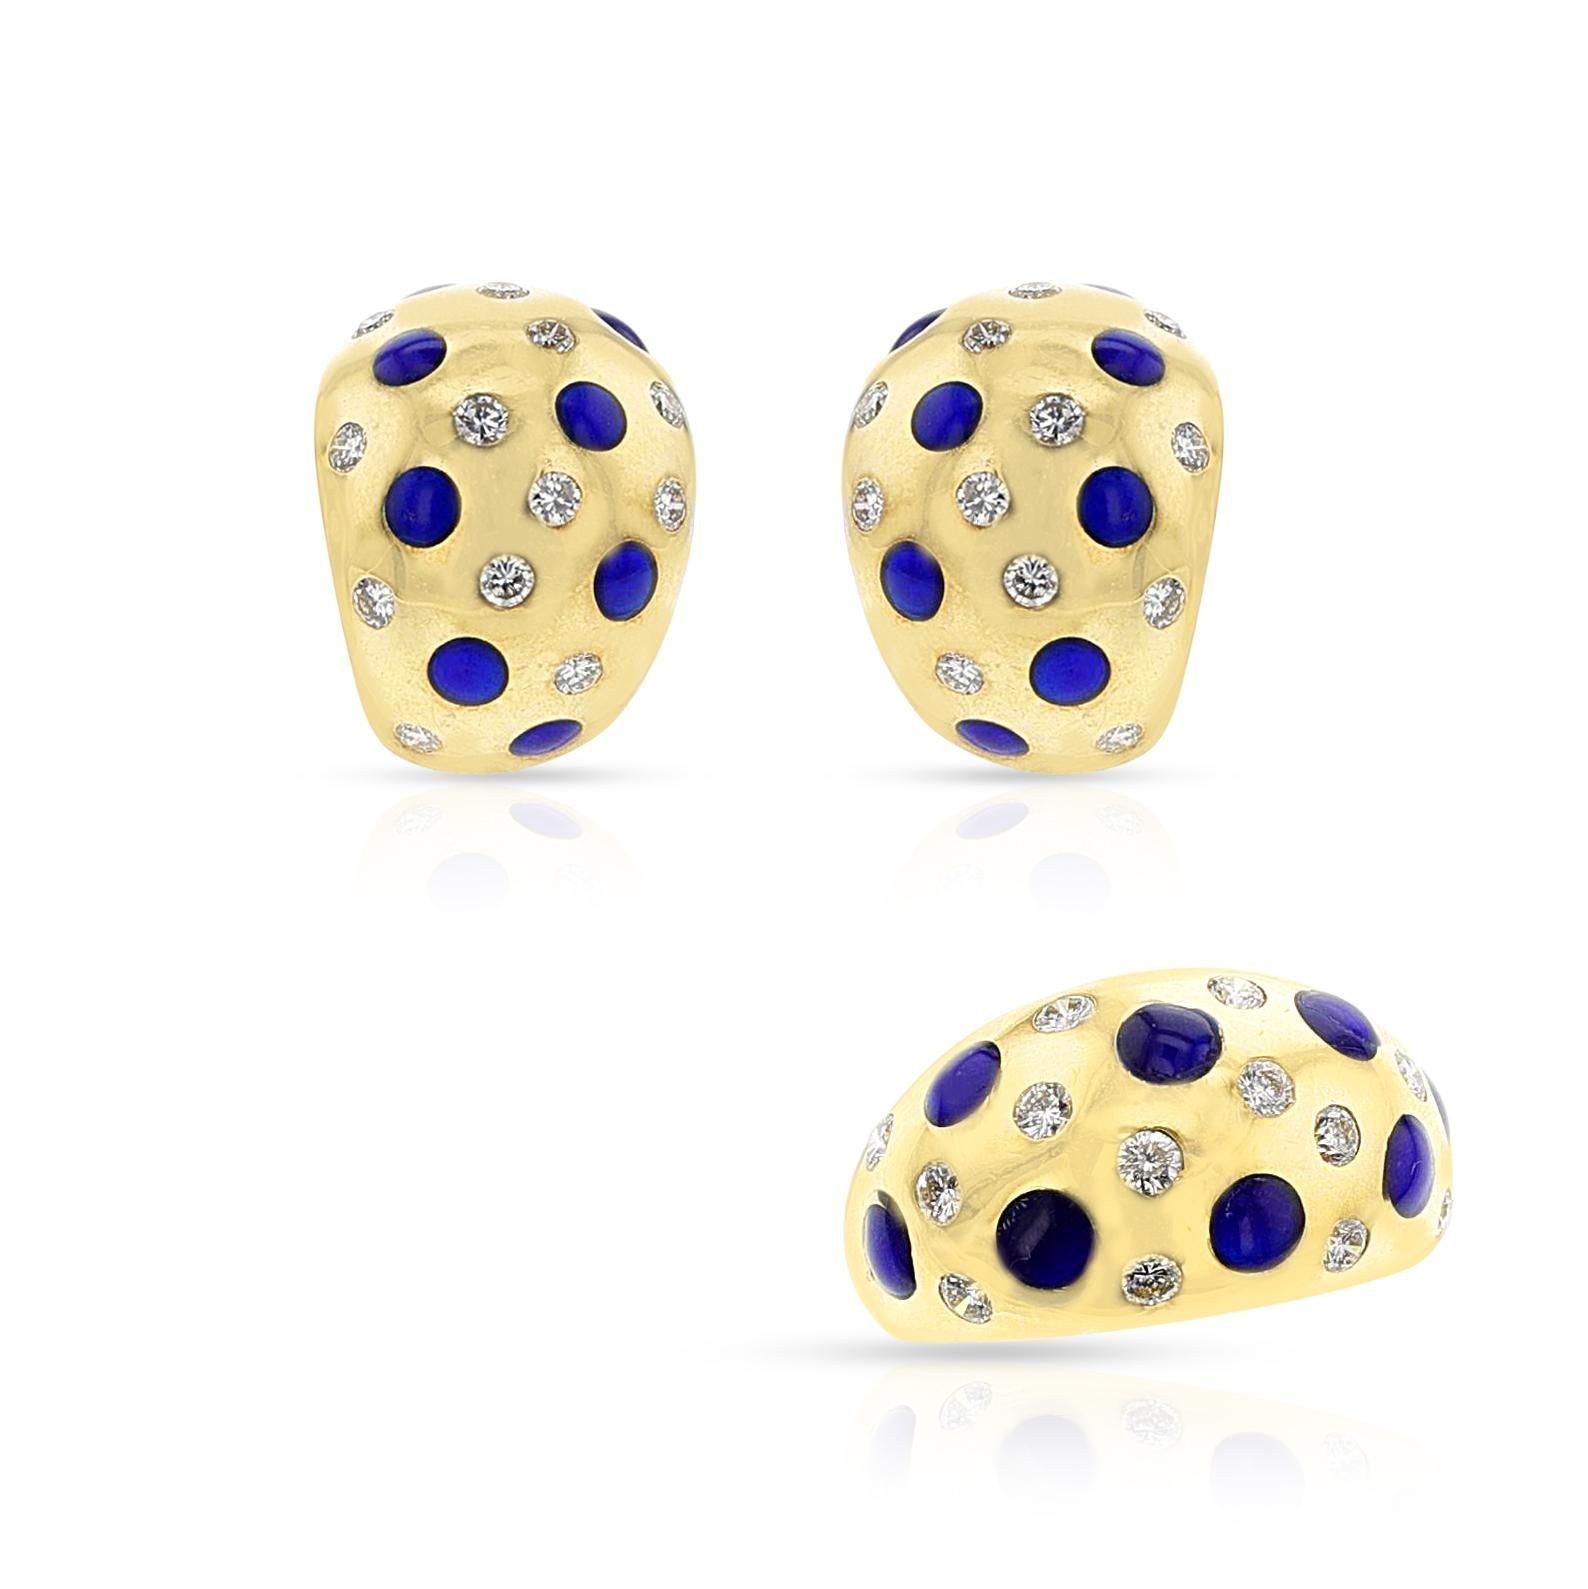 Round Cut Van Cleef & Arpels Plique a Jour Enamel and Diamond Earring and Ring Set, 18k For Sale